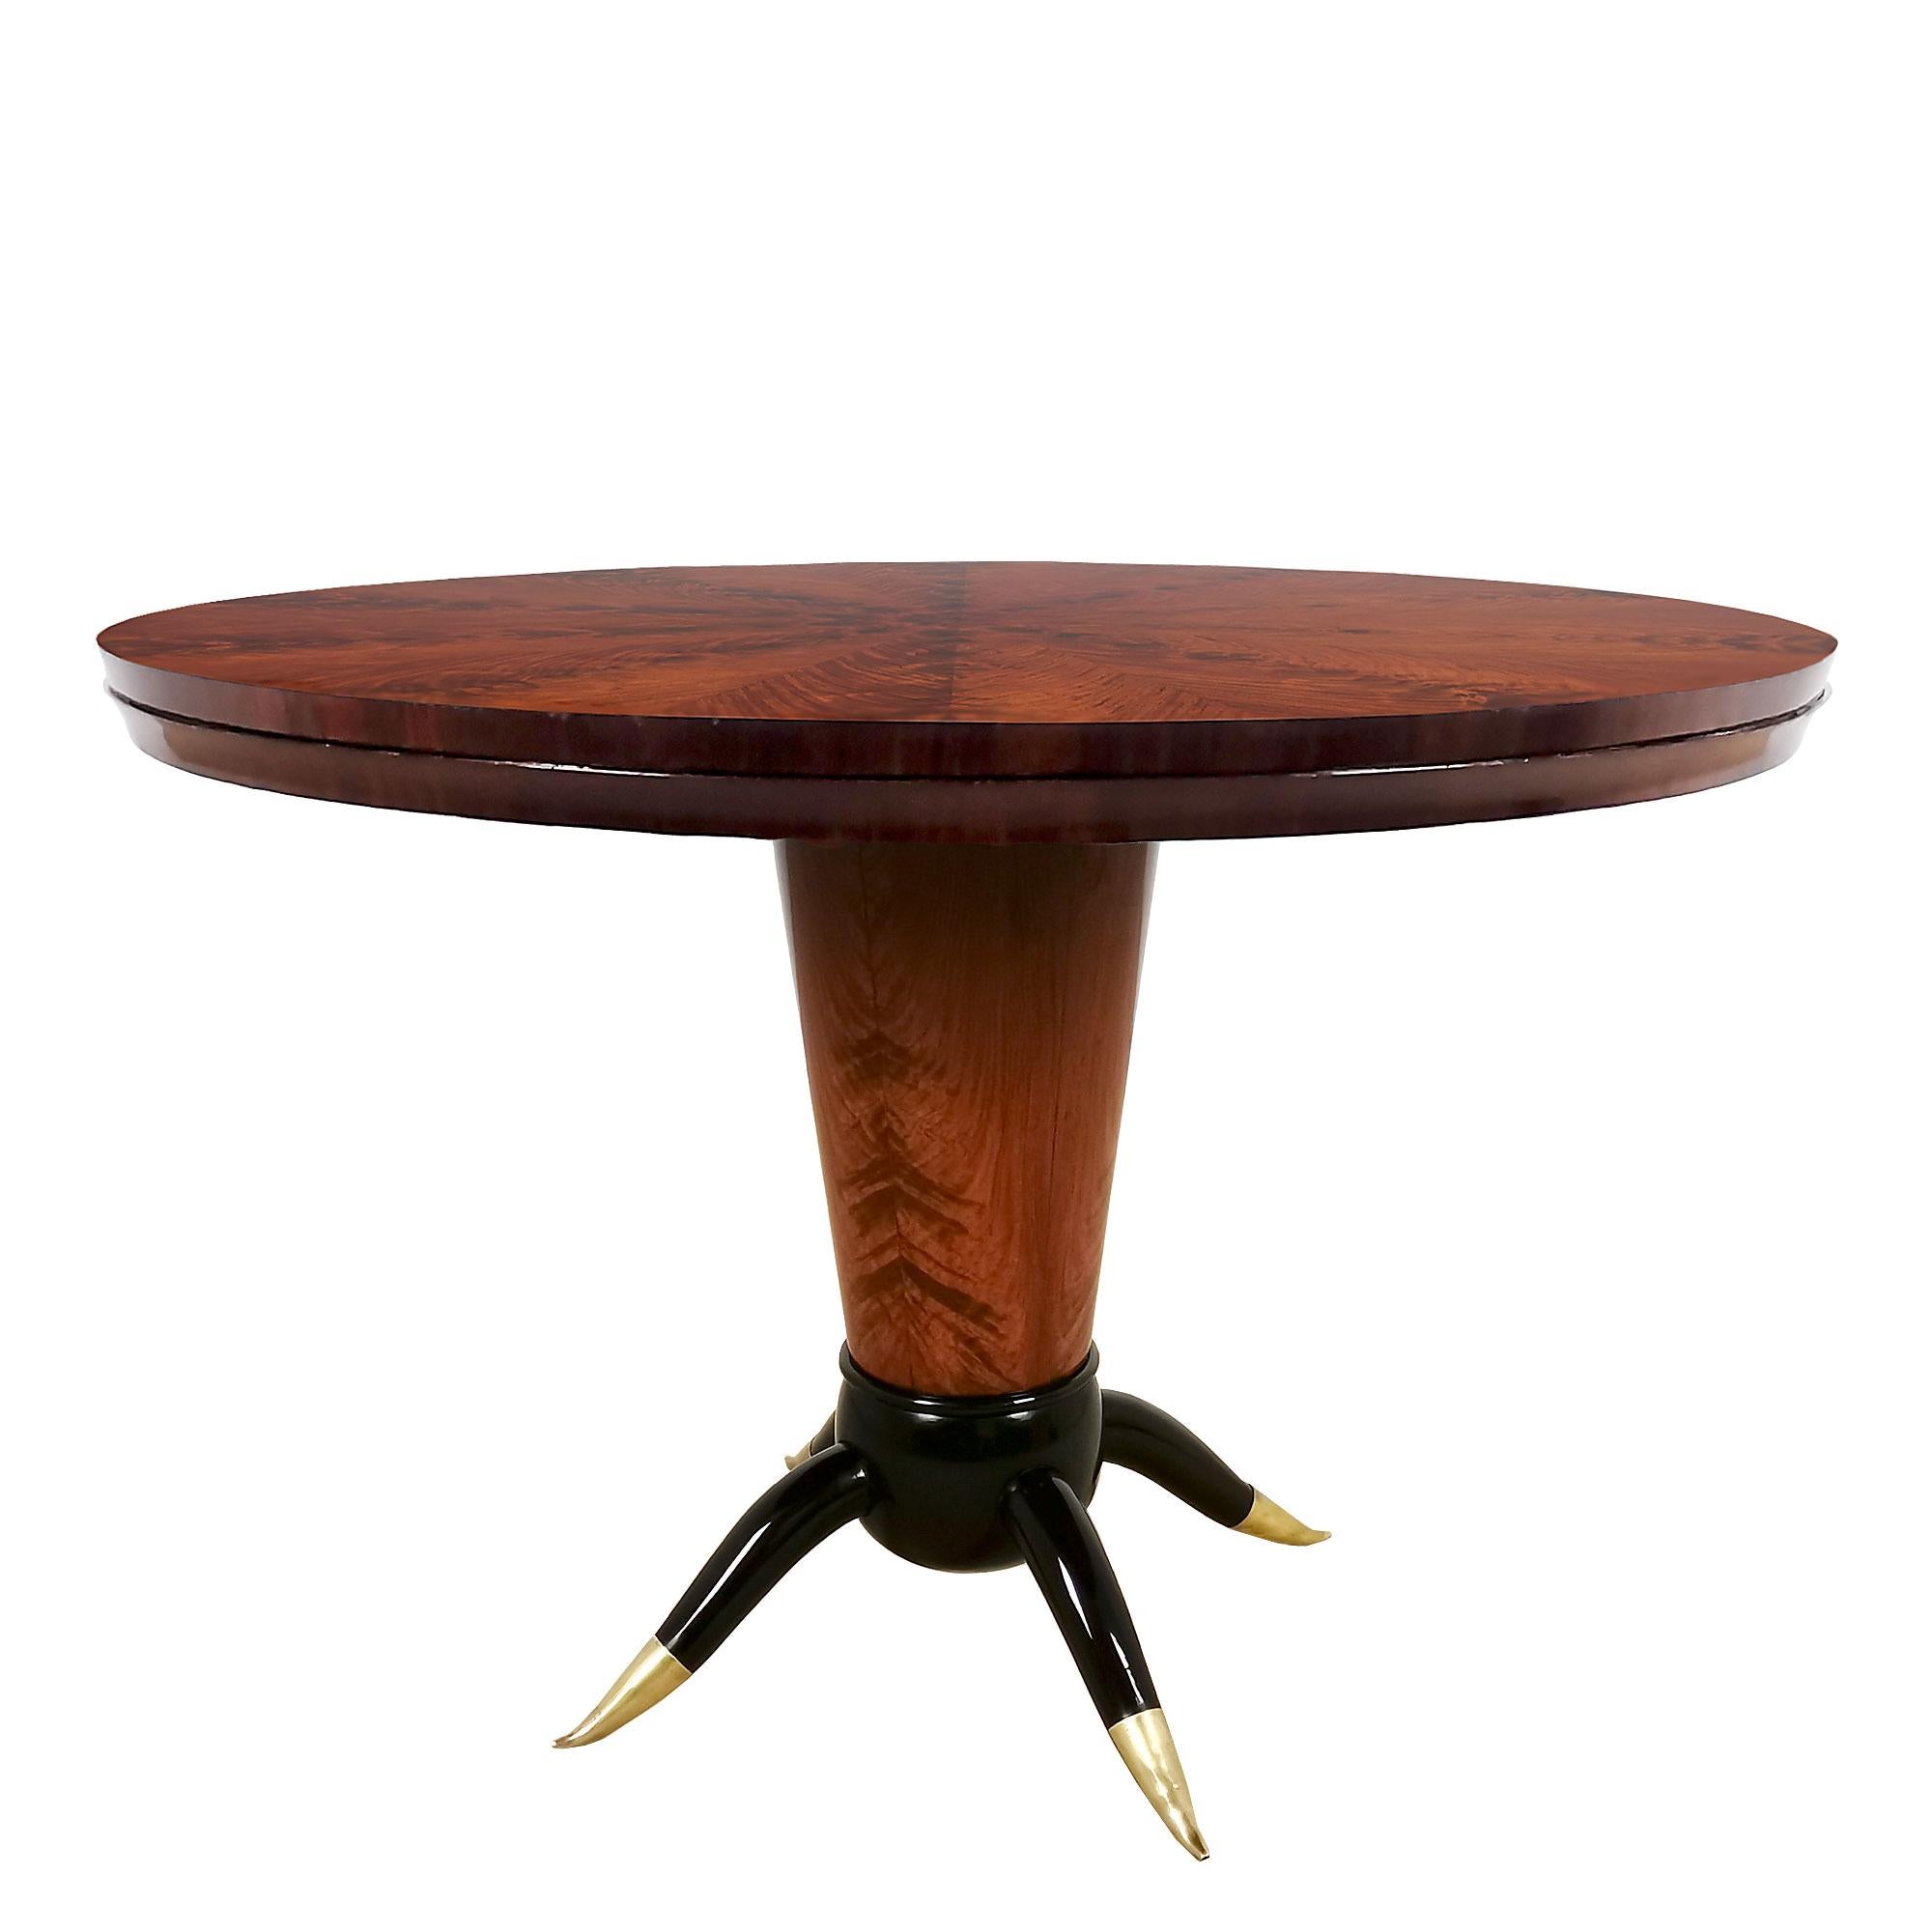 Center table in solid wood with burr mahogany veneer and stained beech base. On top an spectacular ten part star pattern veneer, French polish. Polished brass feet.

Italy c. 1940.